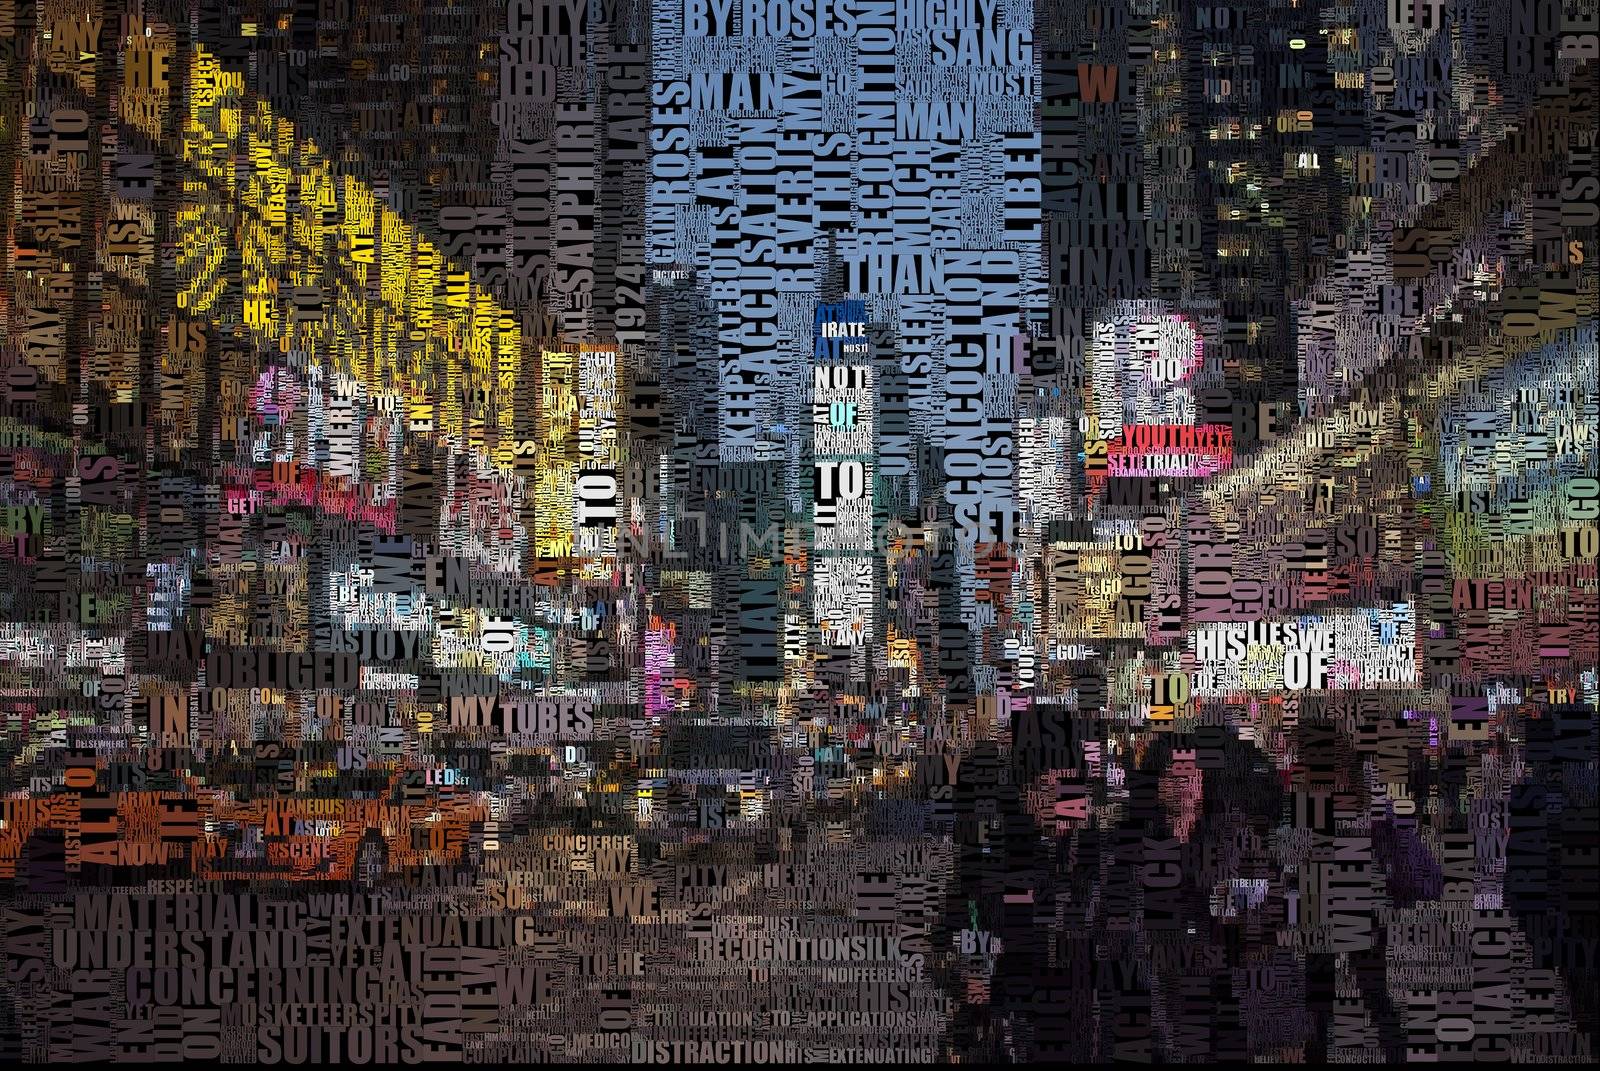 Time square at night. Image composed entirely of words